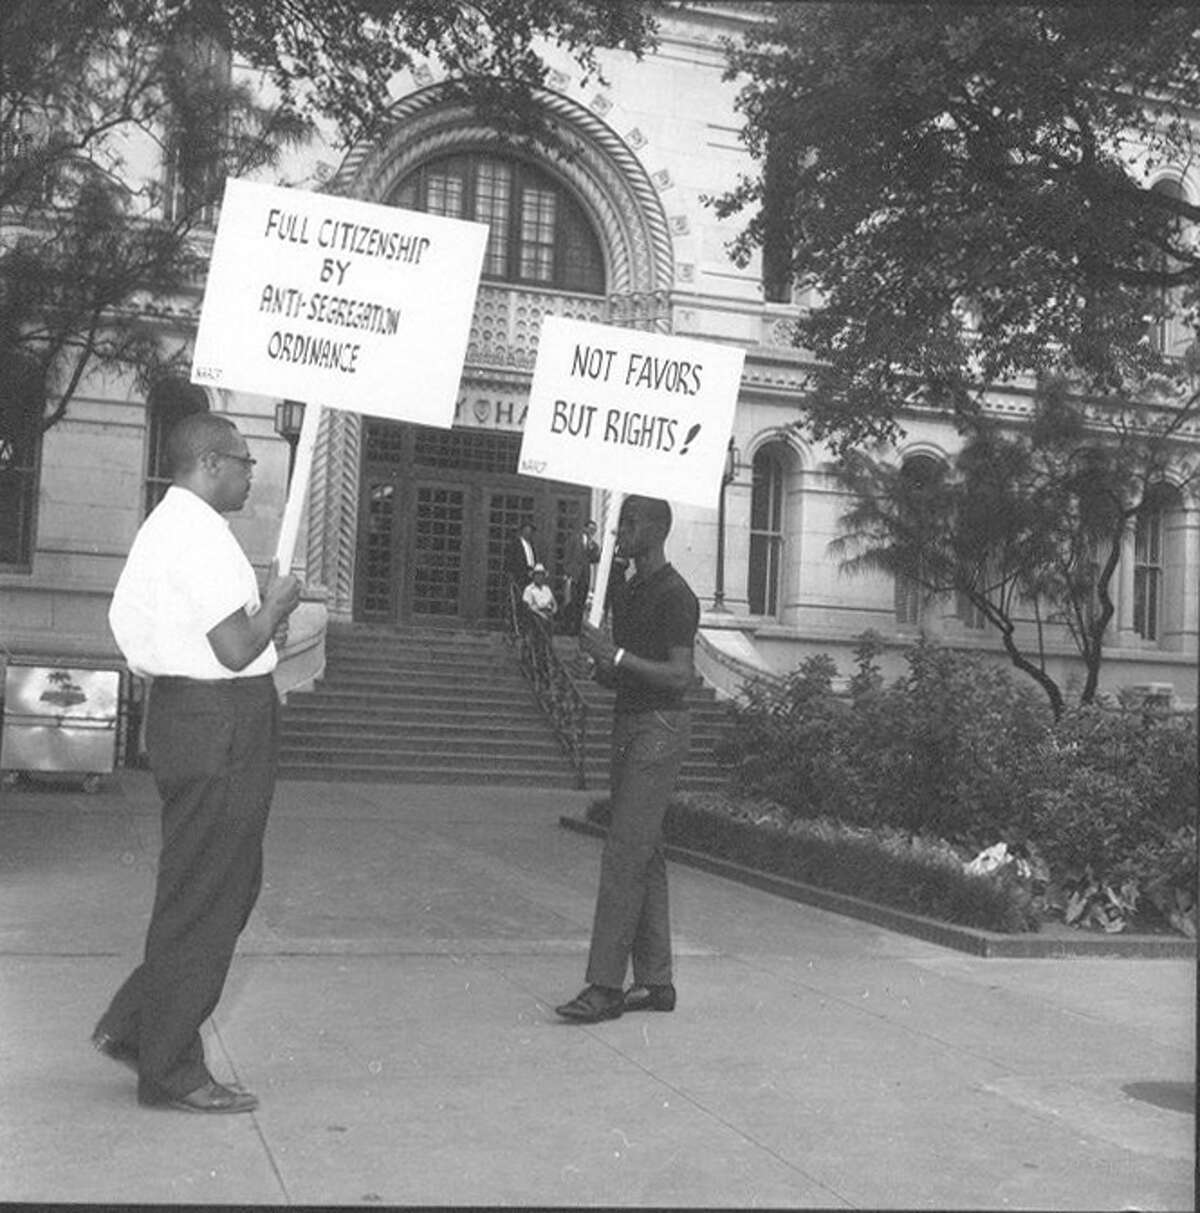 Harry V. Burns (left) and another man protest segregation at City Hall on June 12, 1963.